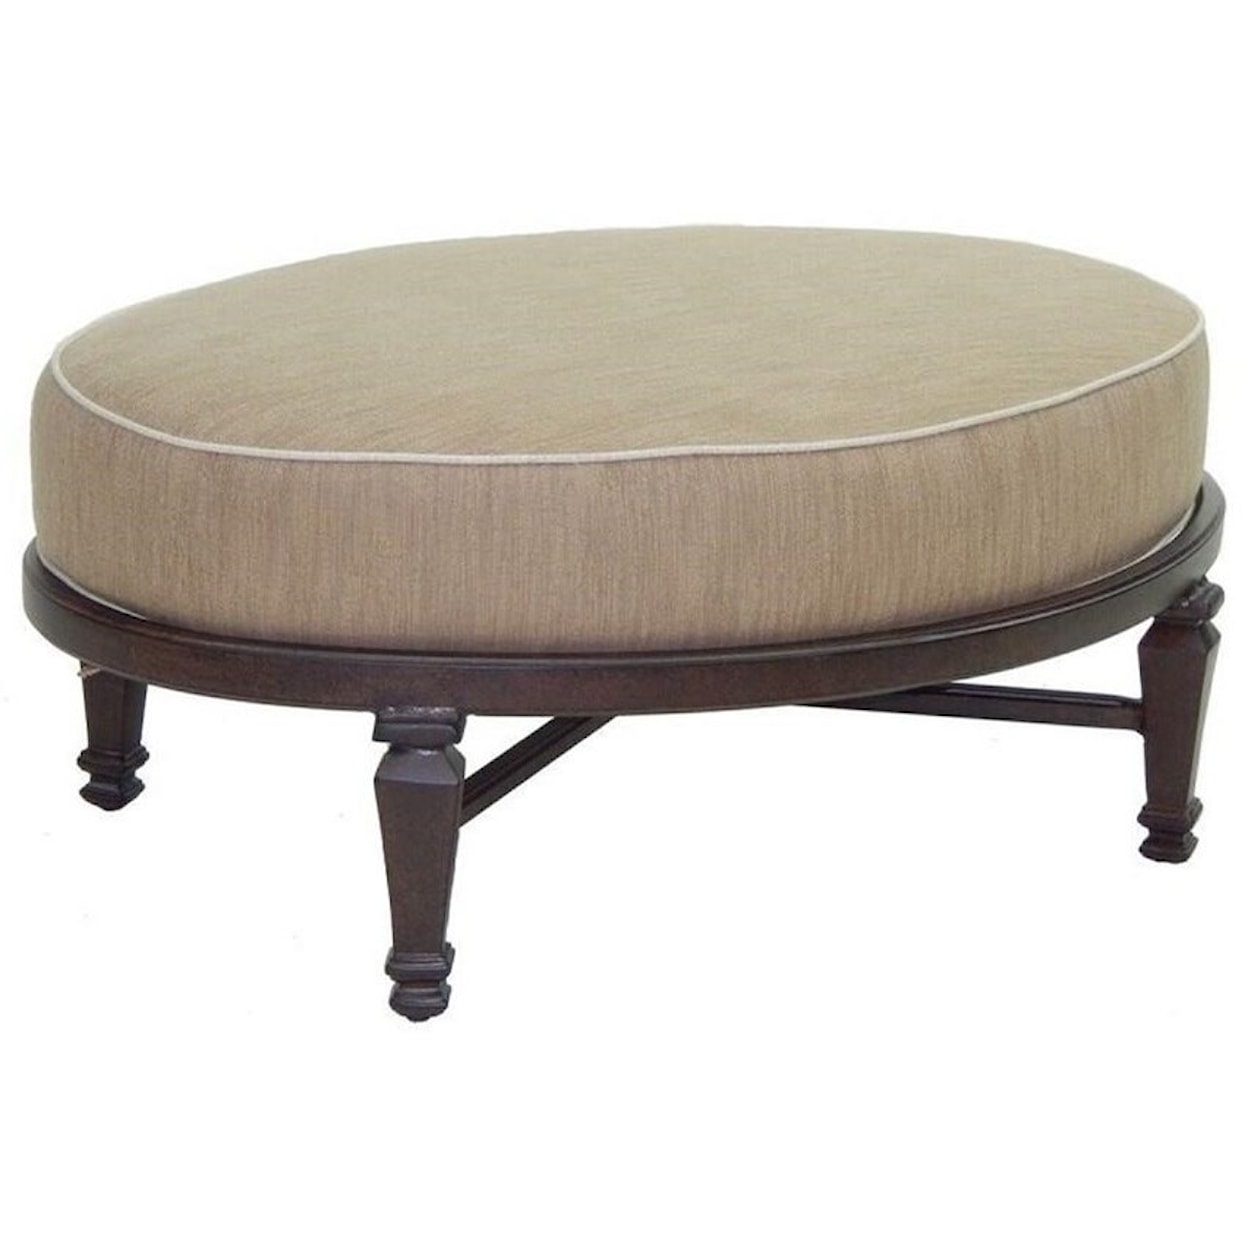 Castelle by Pride Family Brands Villa Bianca Cushioned Oval Ottoman